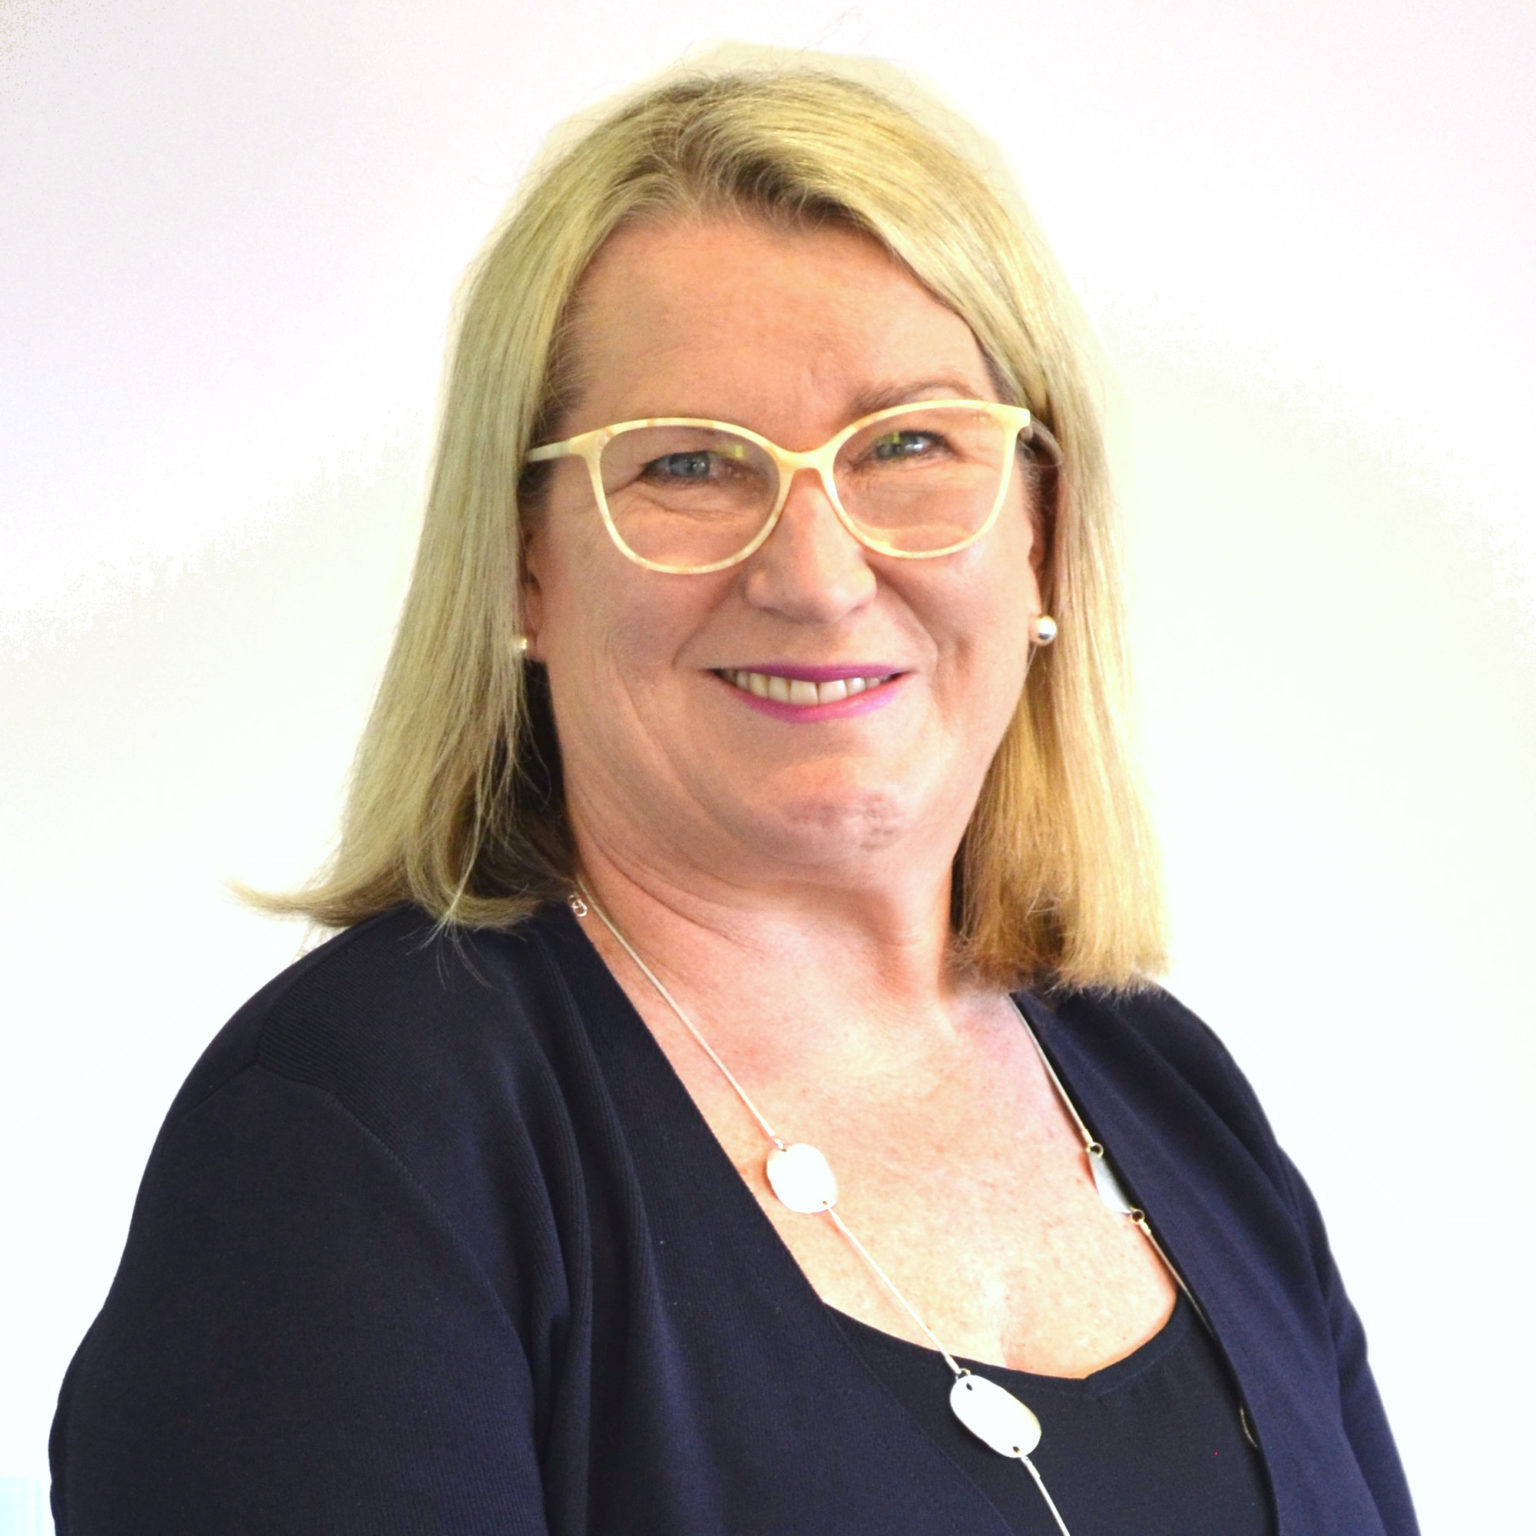 Anna Colley - Client Services Manager, Financial Planning